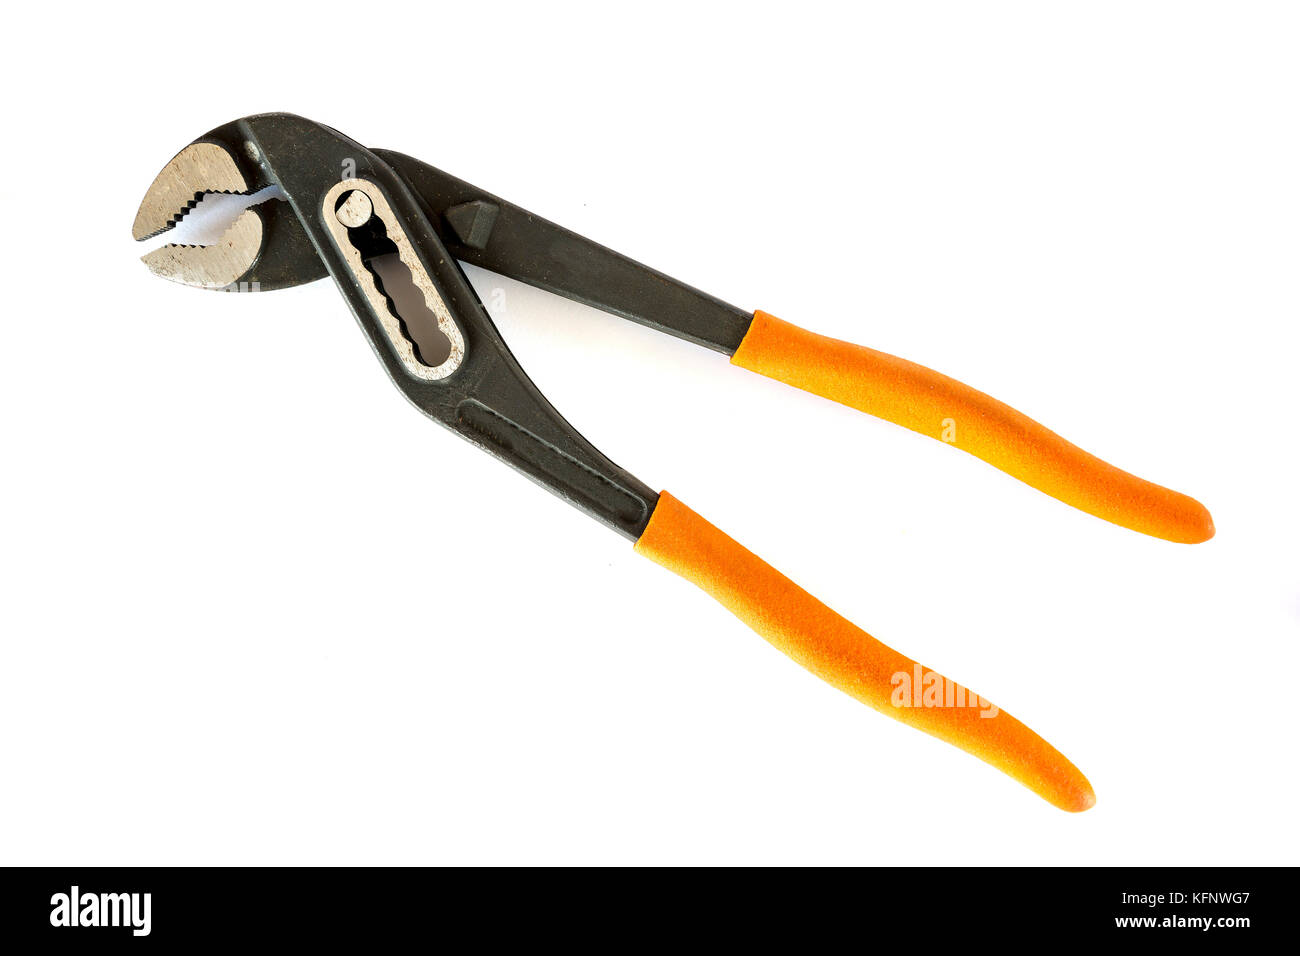 Adjustable pliers isolated on a white background. Studio shot Stock Photo